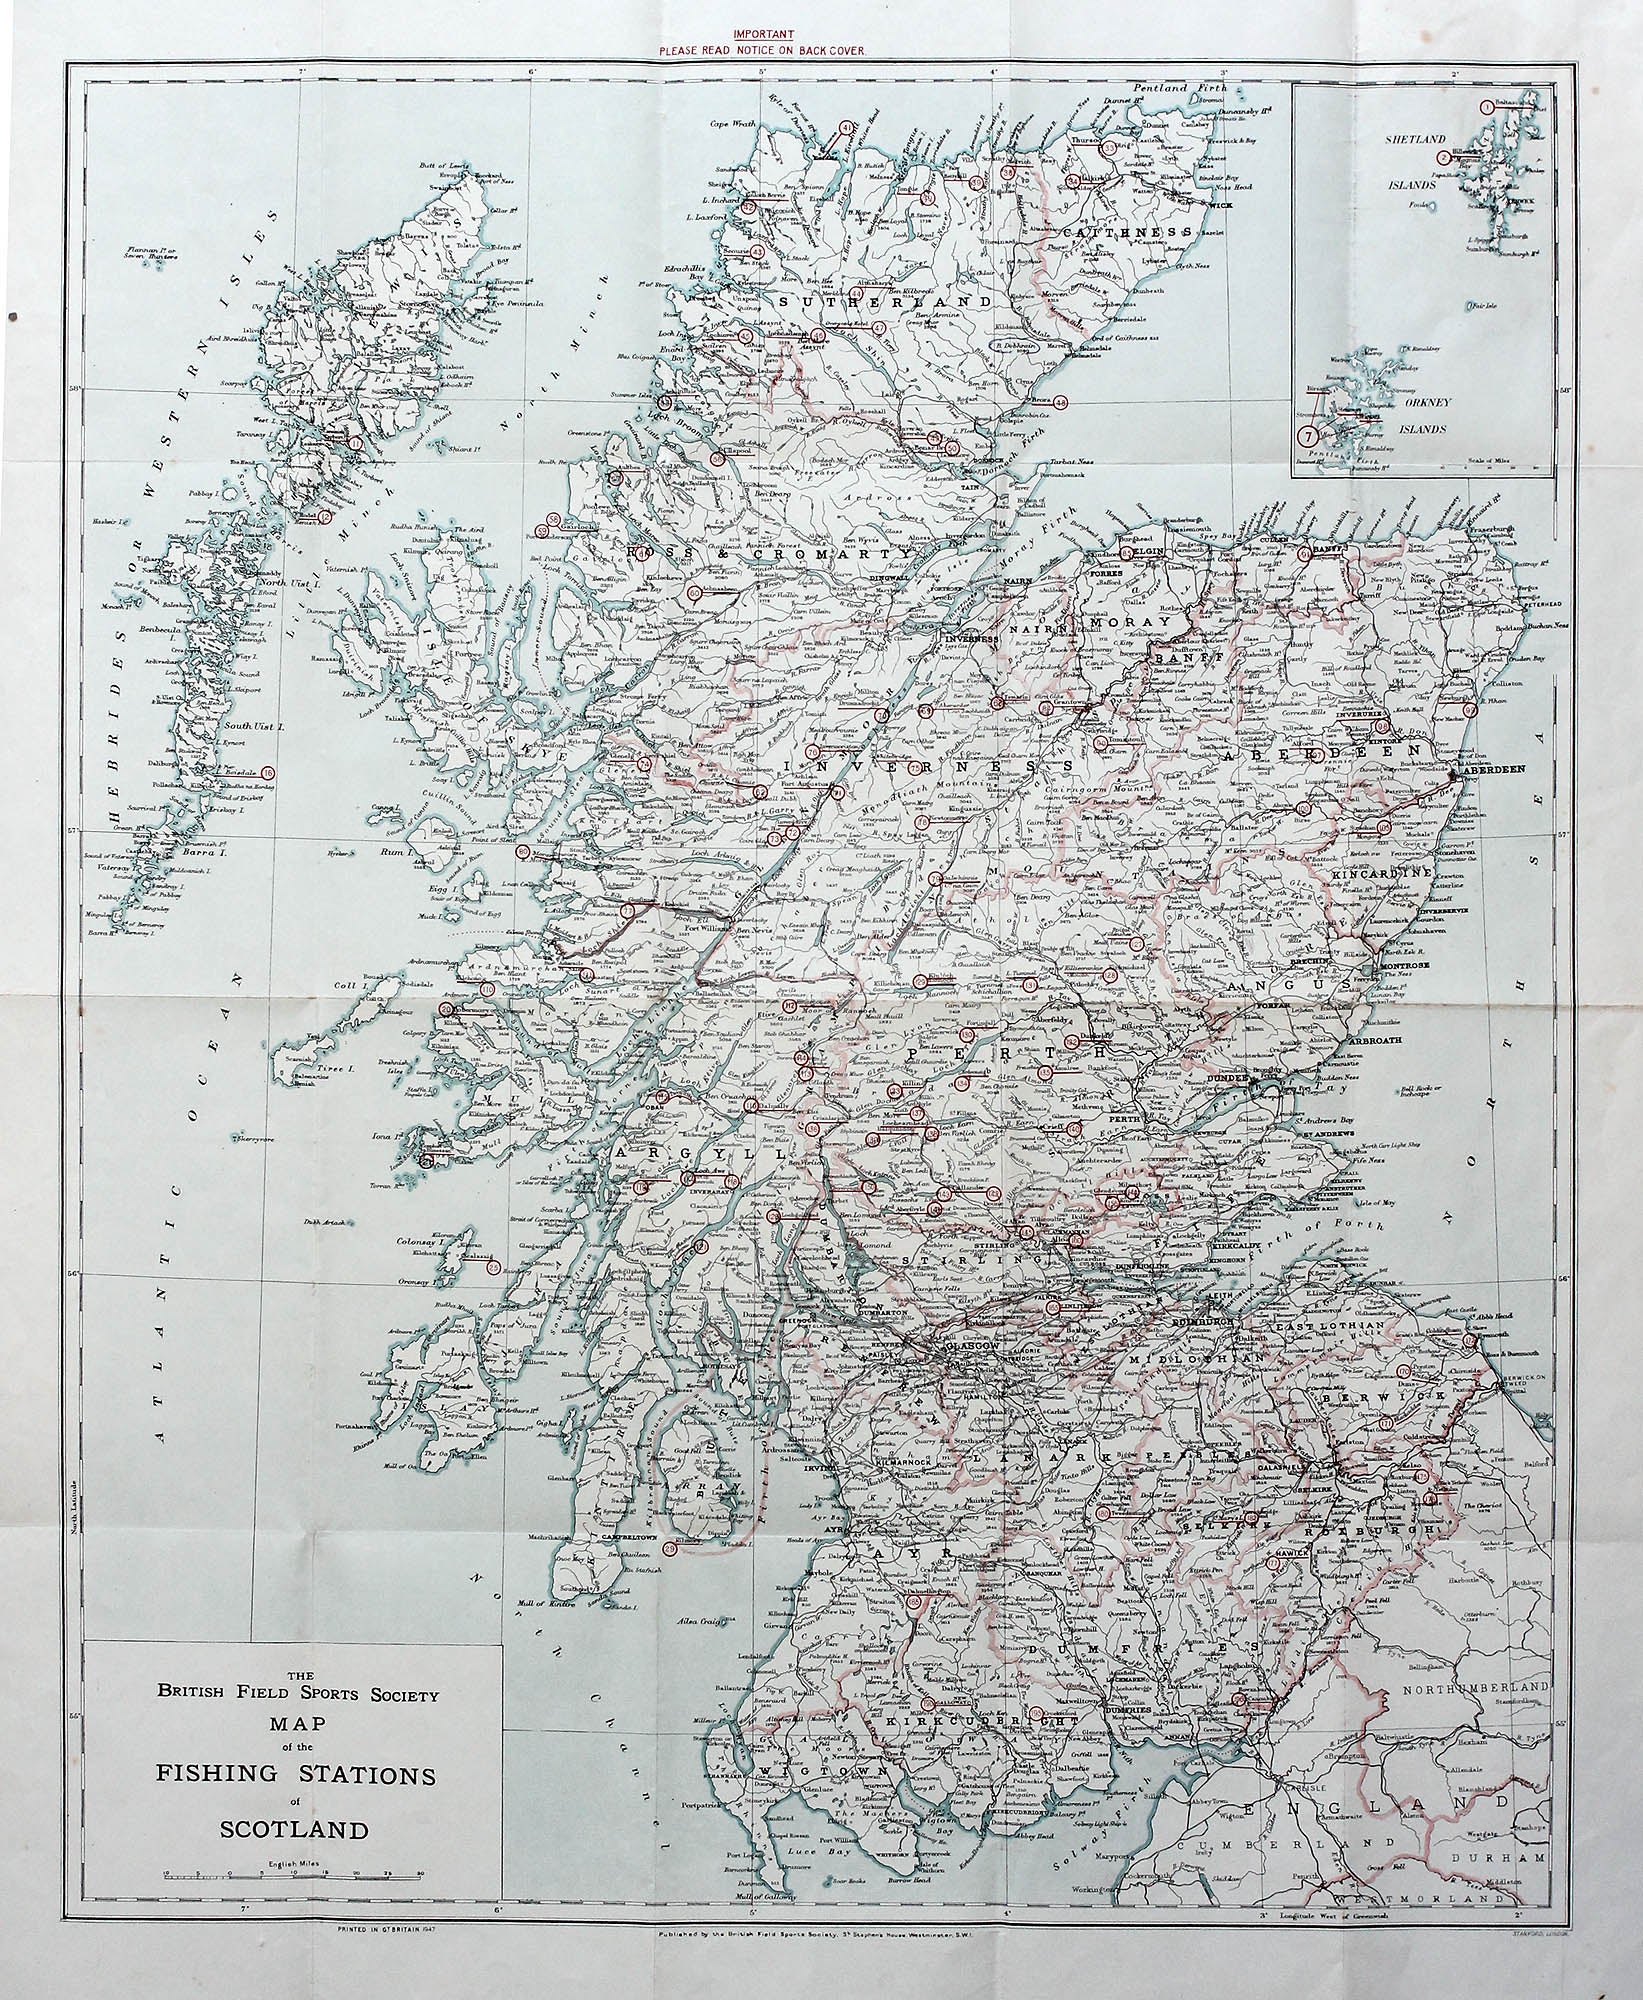 Scotland - Fishing) Map of the Fishing Stations – The Old Map Gallery